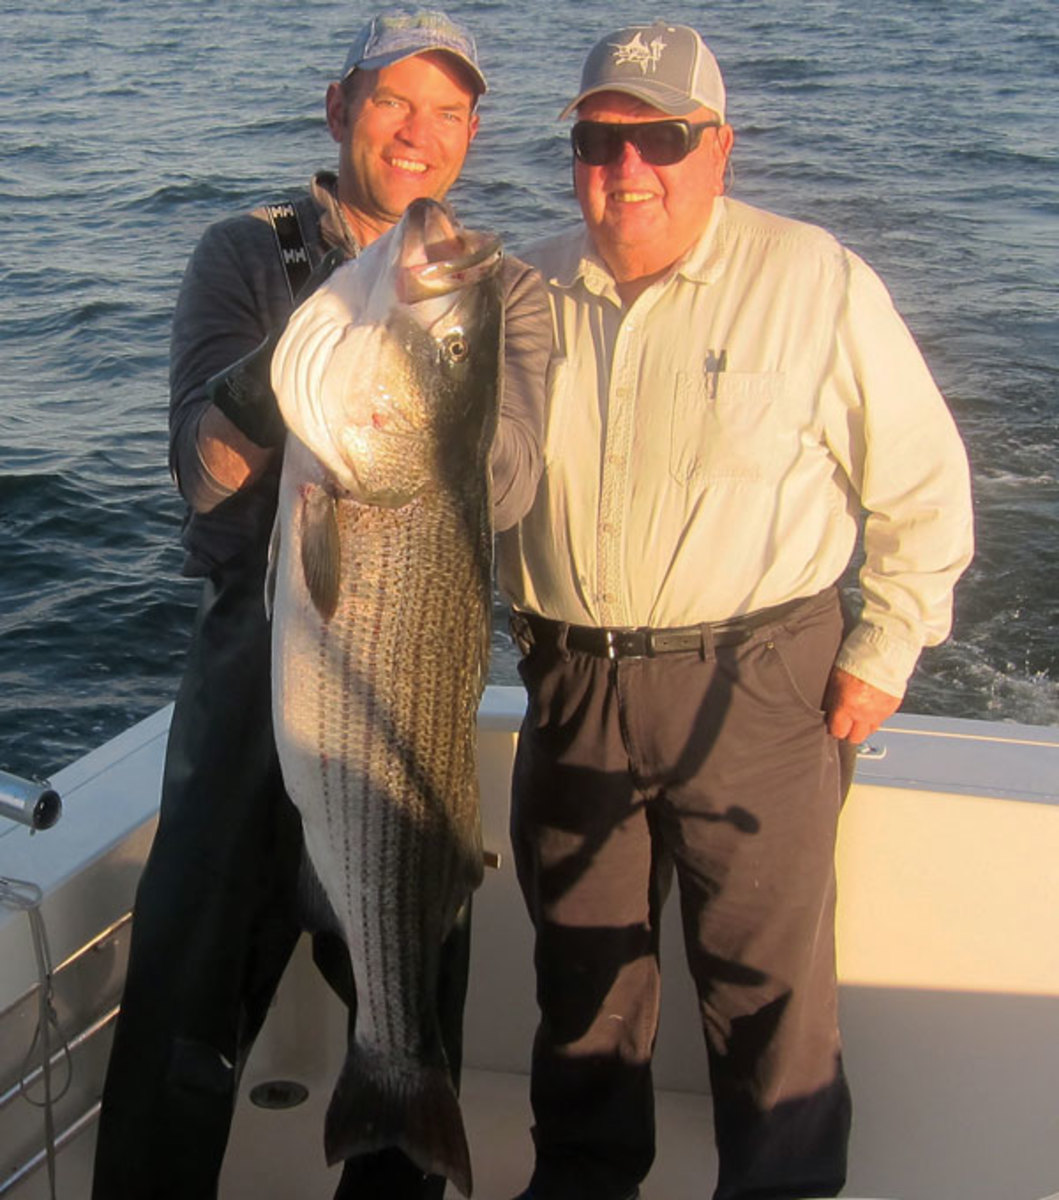 The Rhodes family has fished together for more than 50 years.